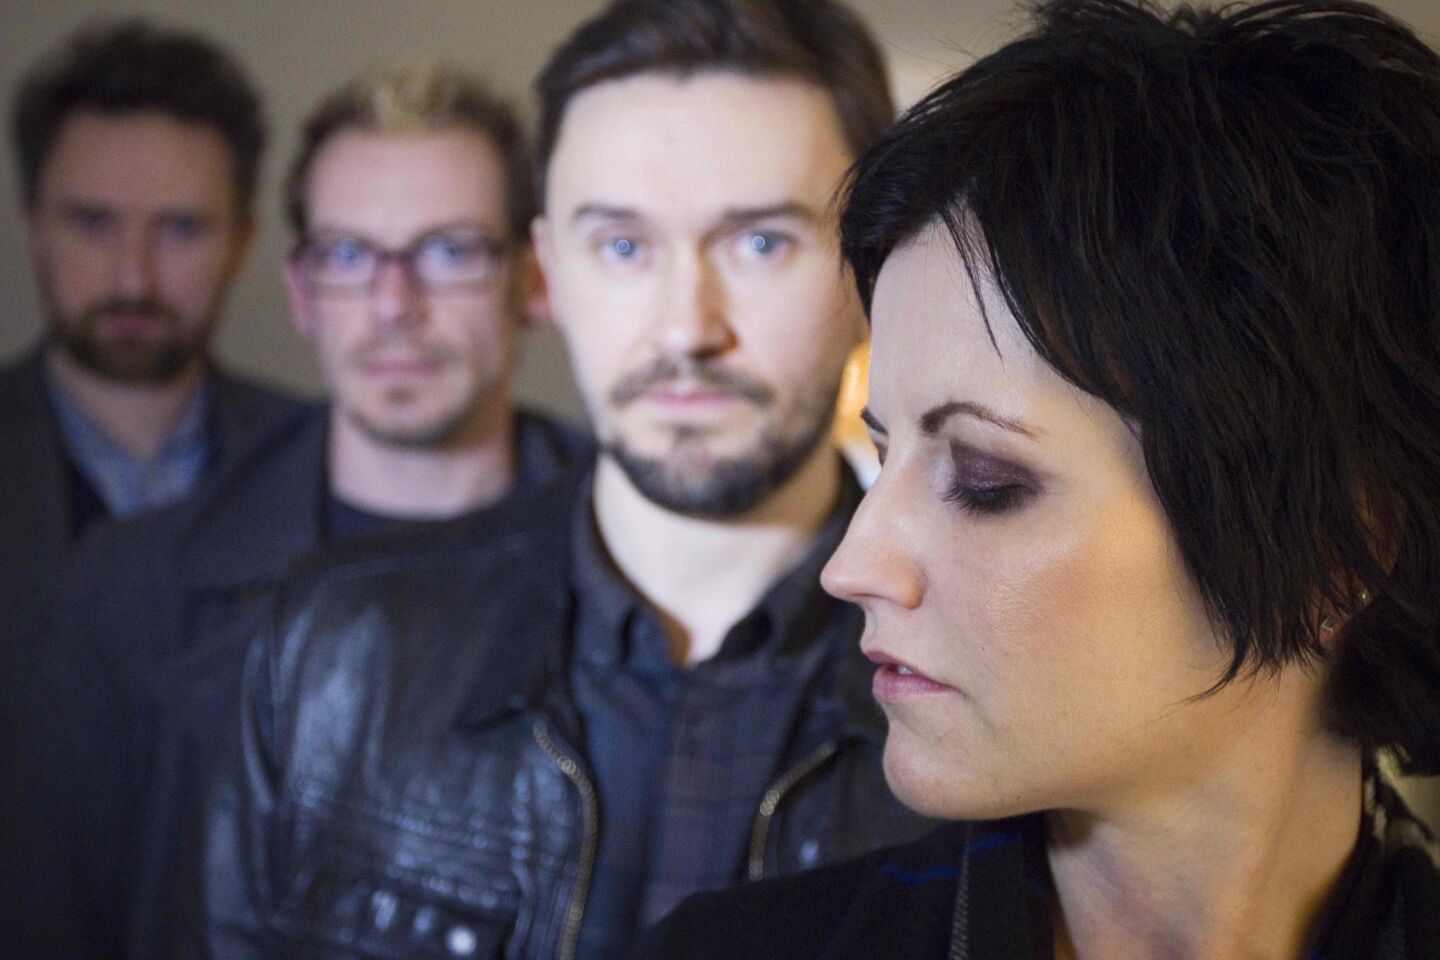 Irish rock band the Cranberries lead singer Dolores O'Riordan poses with guitar player Noel Hogan, from left, drummer Fergal Lawler and bassist Mike Hogan on Jan. 18, 2012, in Paris.